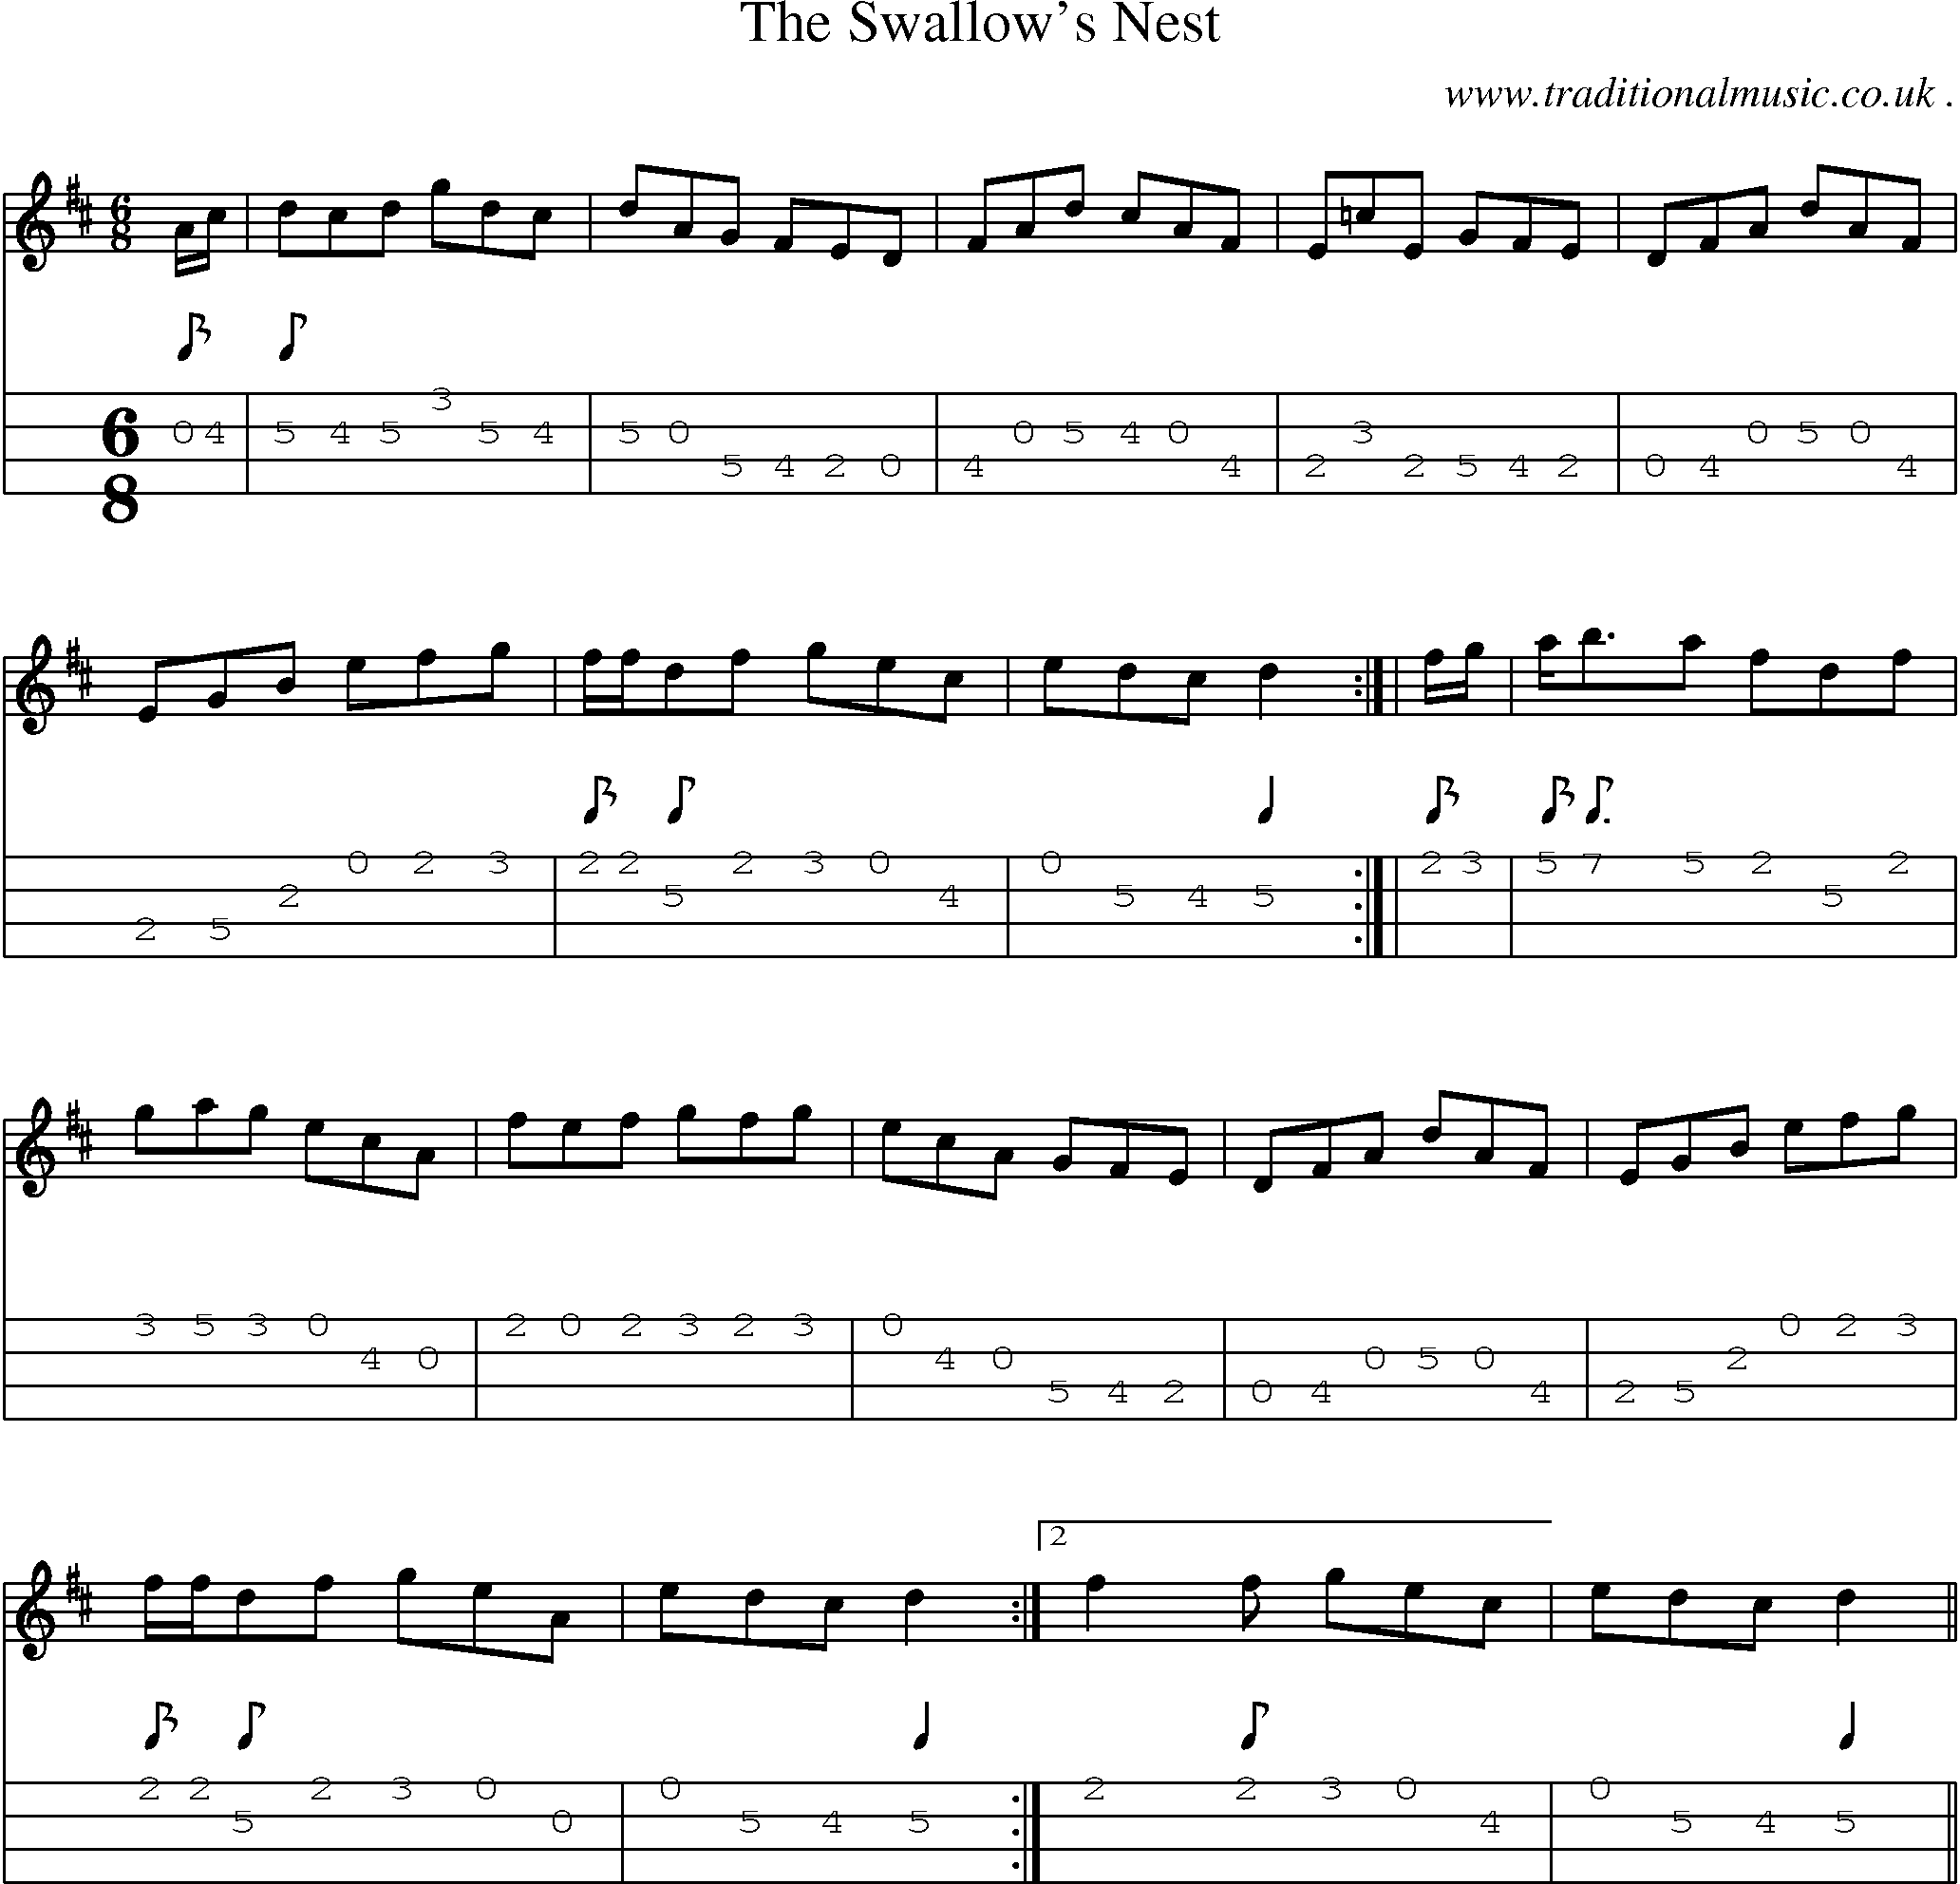 Sheet-Music and Mandolin Tabs for The Swallows Nest